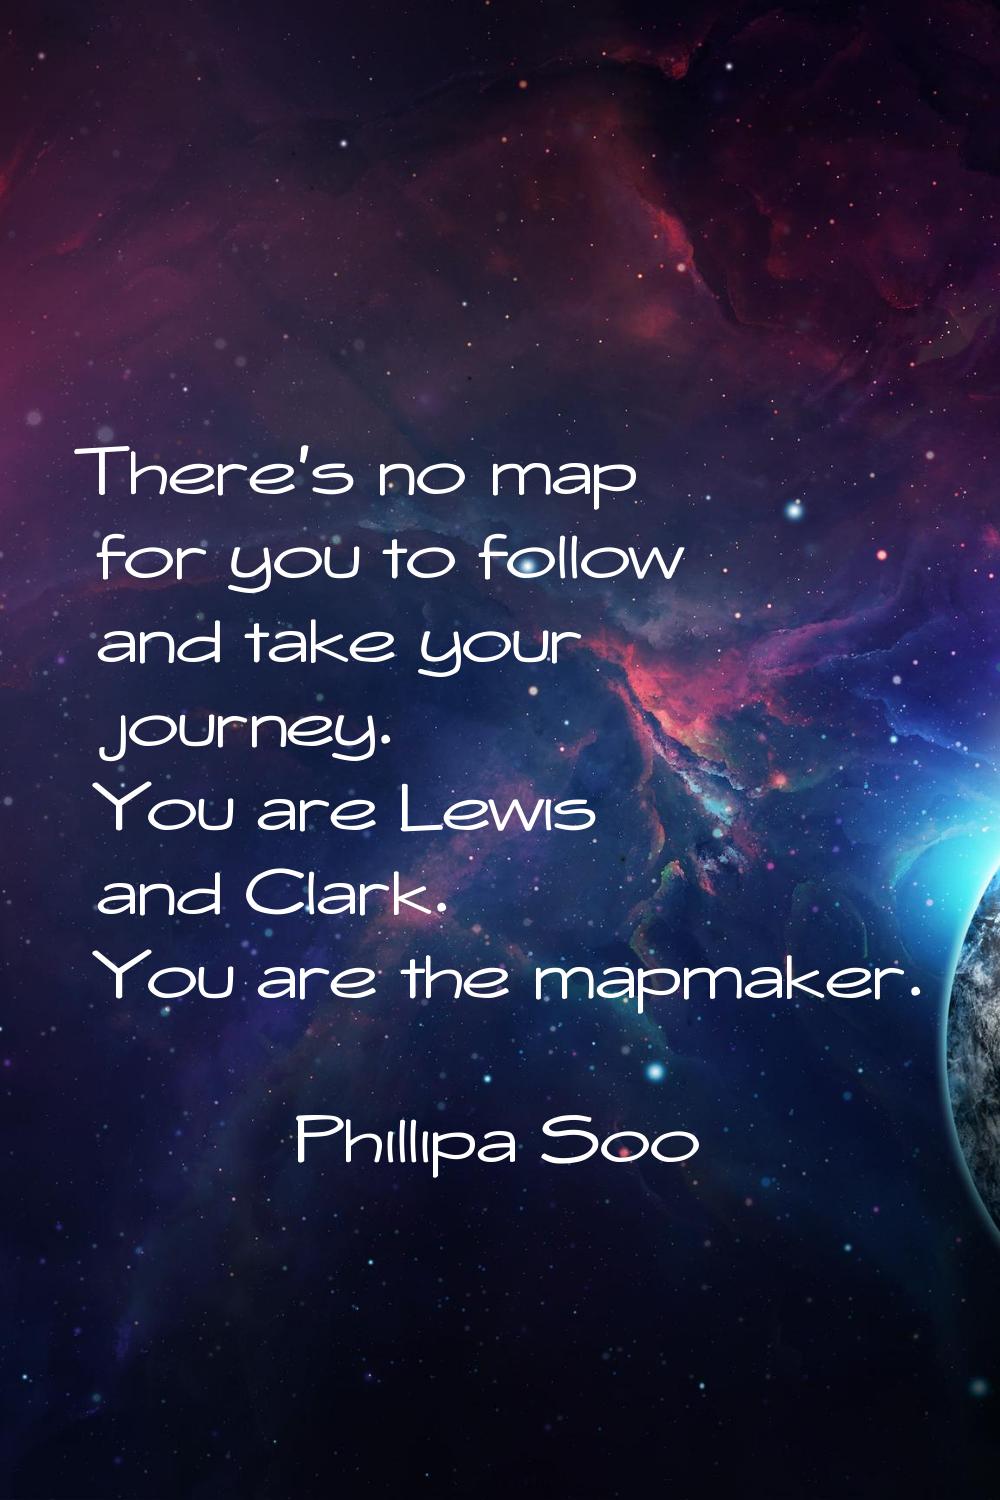 There's no map for you to follow and take your journey. You are Lewis and Clark. You are the mapmak